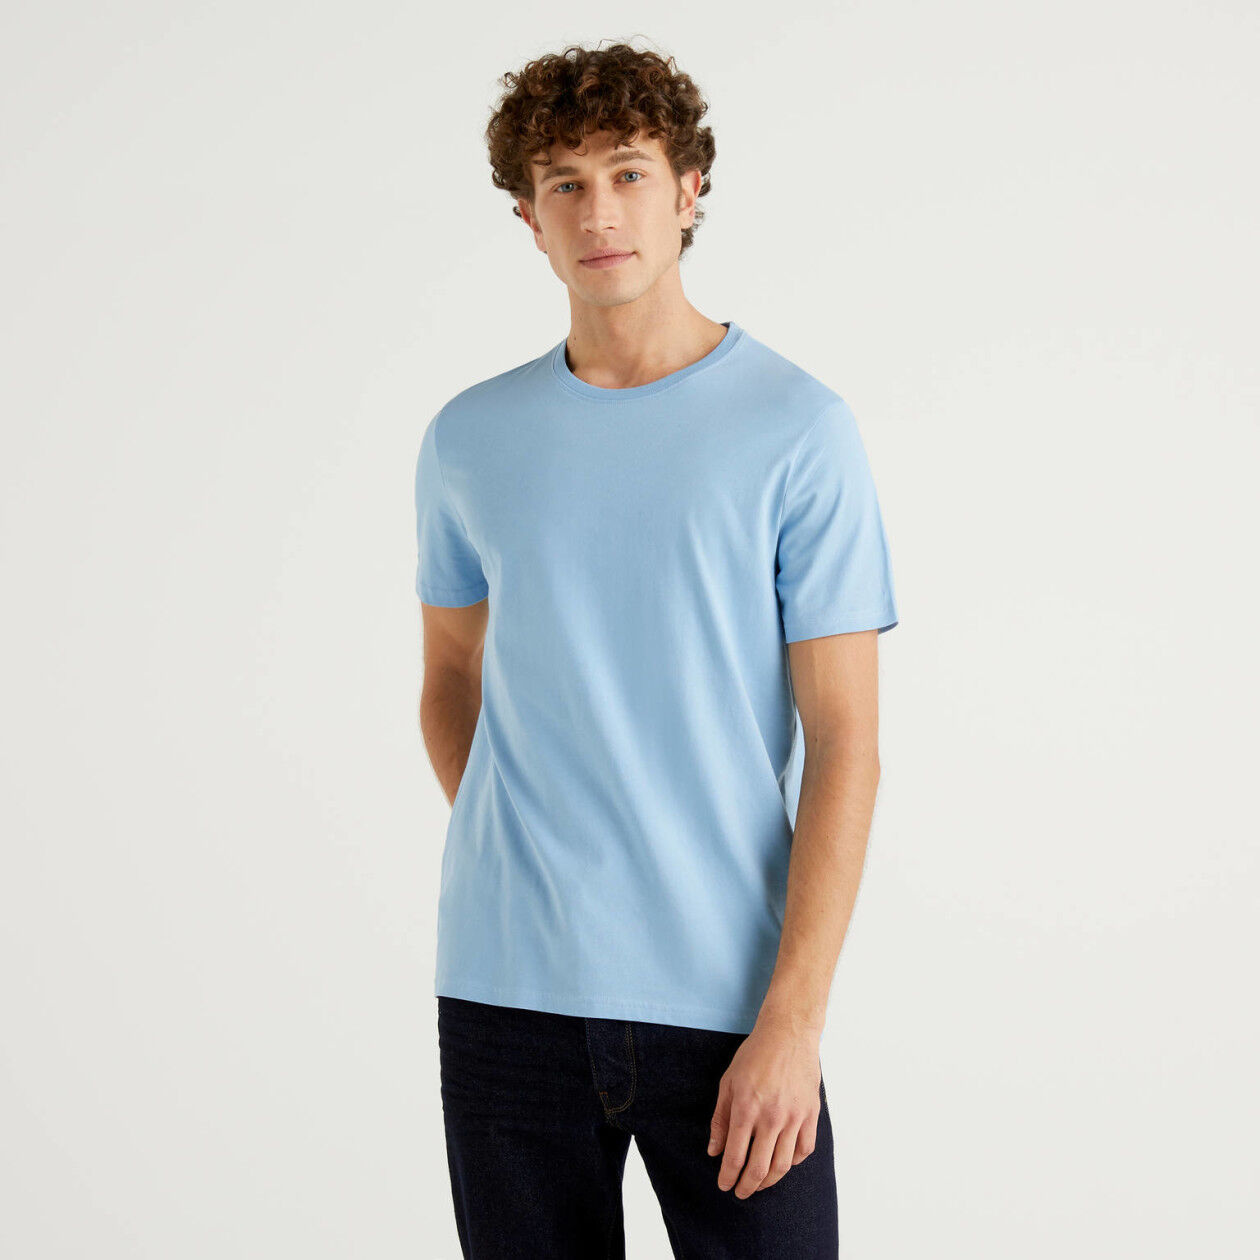 Sky blue t-shirt in pure cotton